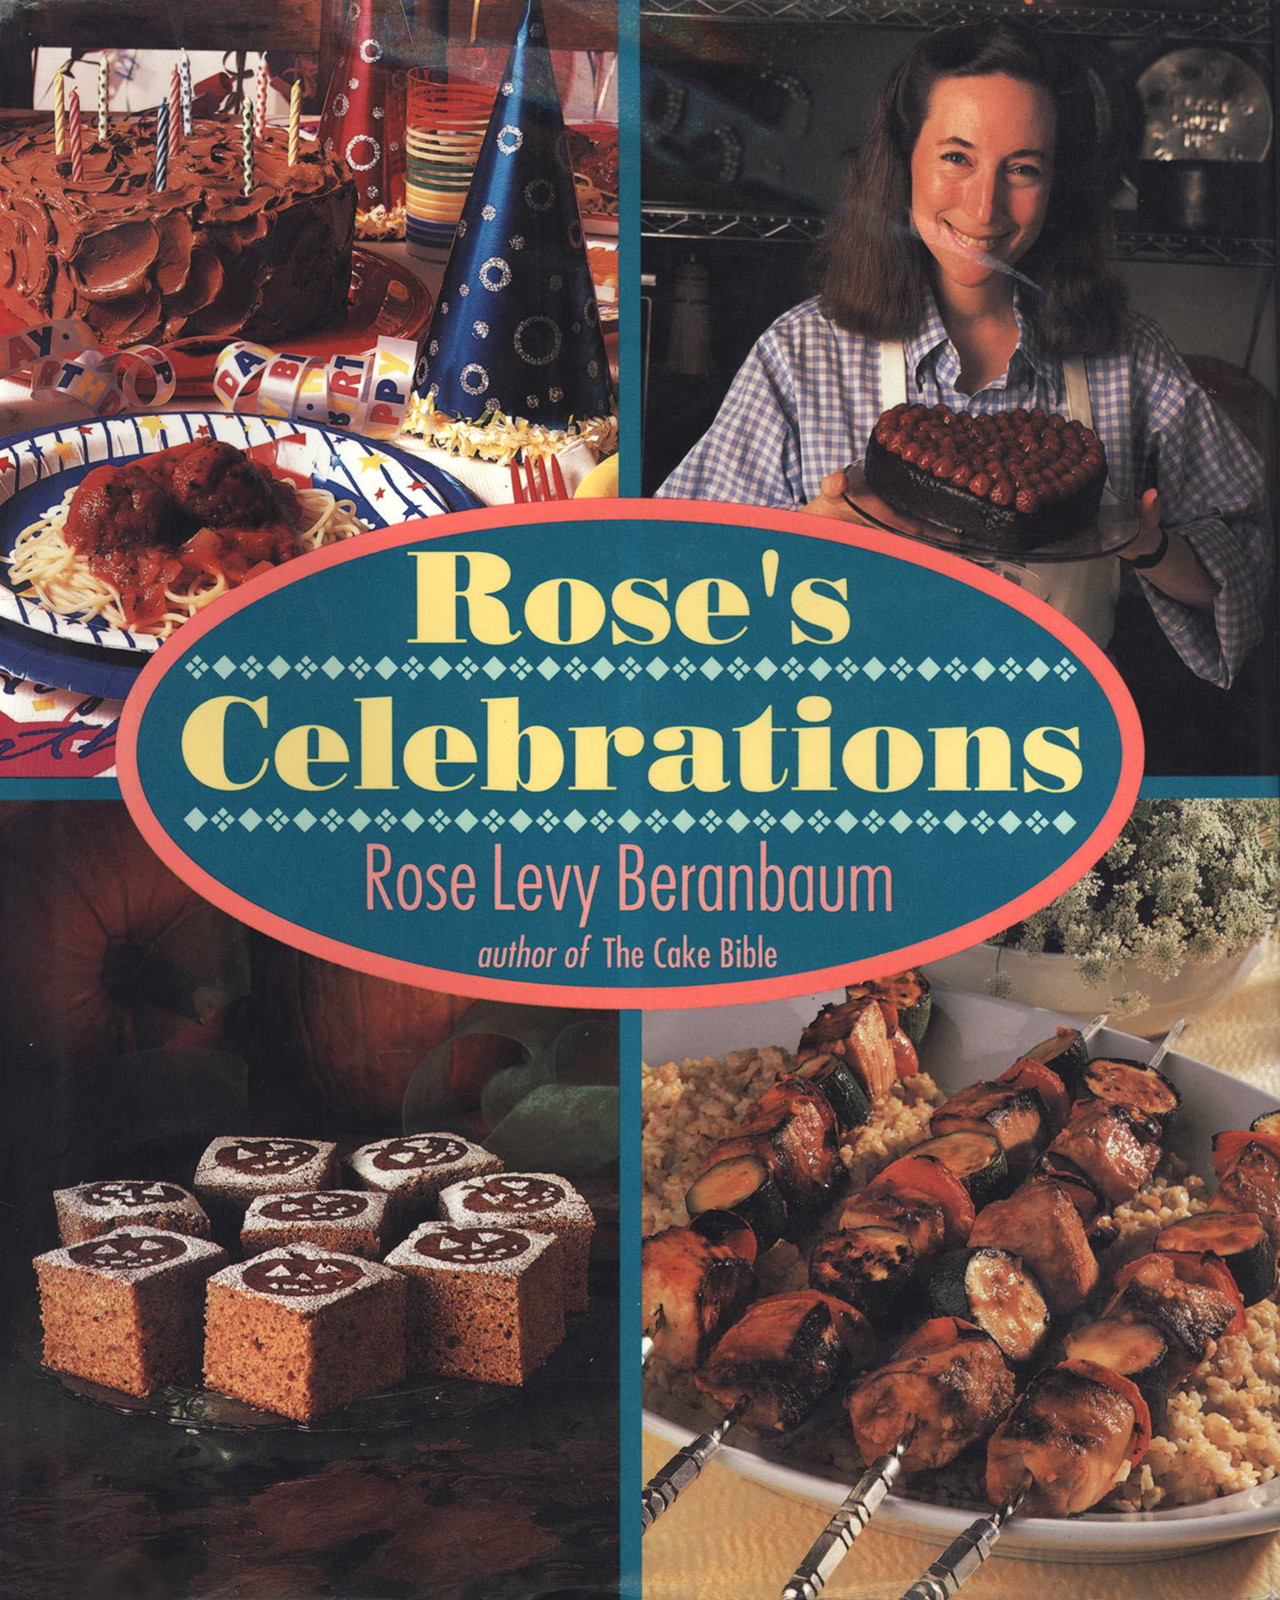 Rose’s Celebrations is a featured title on ckbk